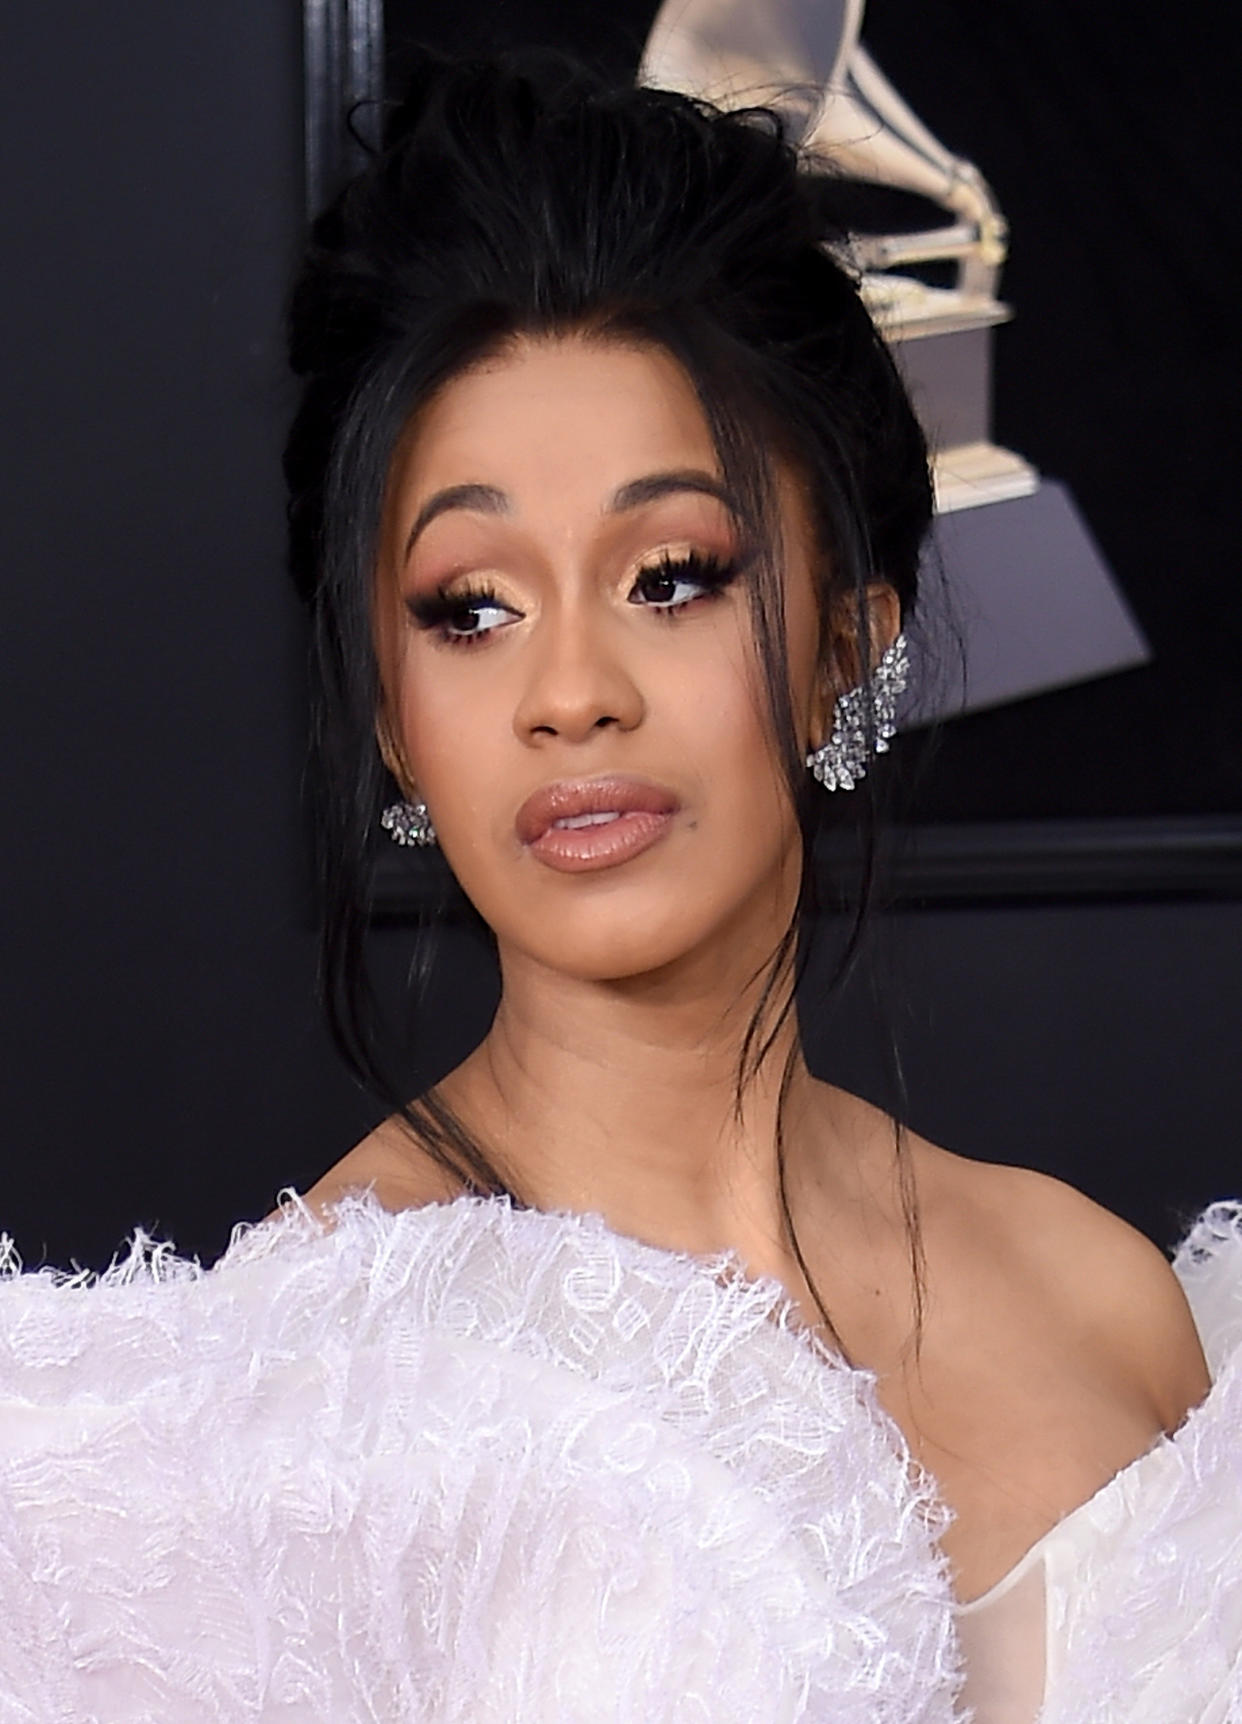 The selfie is a major departure for Cardi B, who went glam at the 2018 Grammys. (Photo: Dimitrios Kambouris/Getty Images for NARAS)